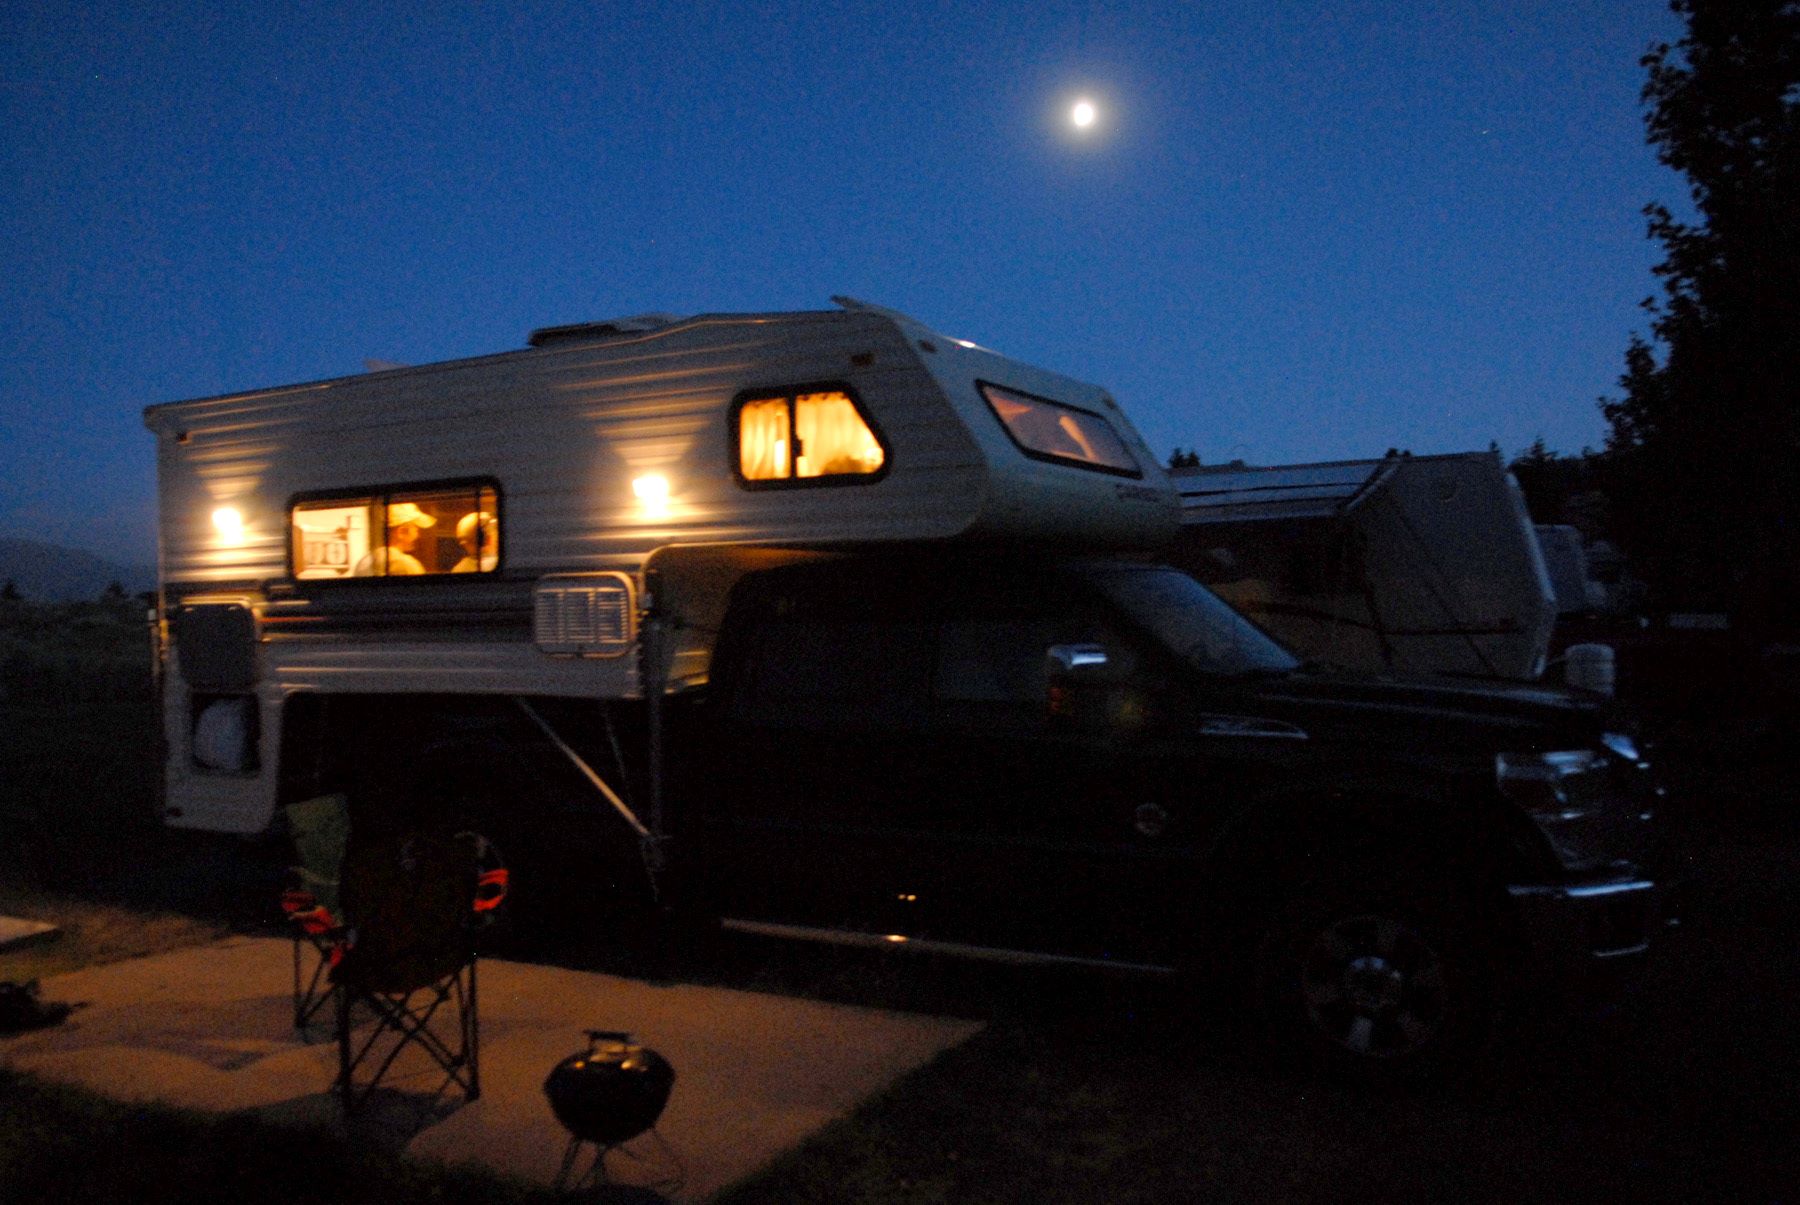 Campers repairing their RV at night in the Madison River Valley near Yellow Stone National Park